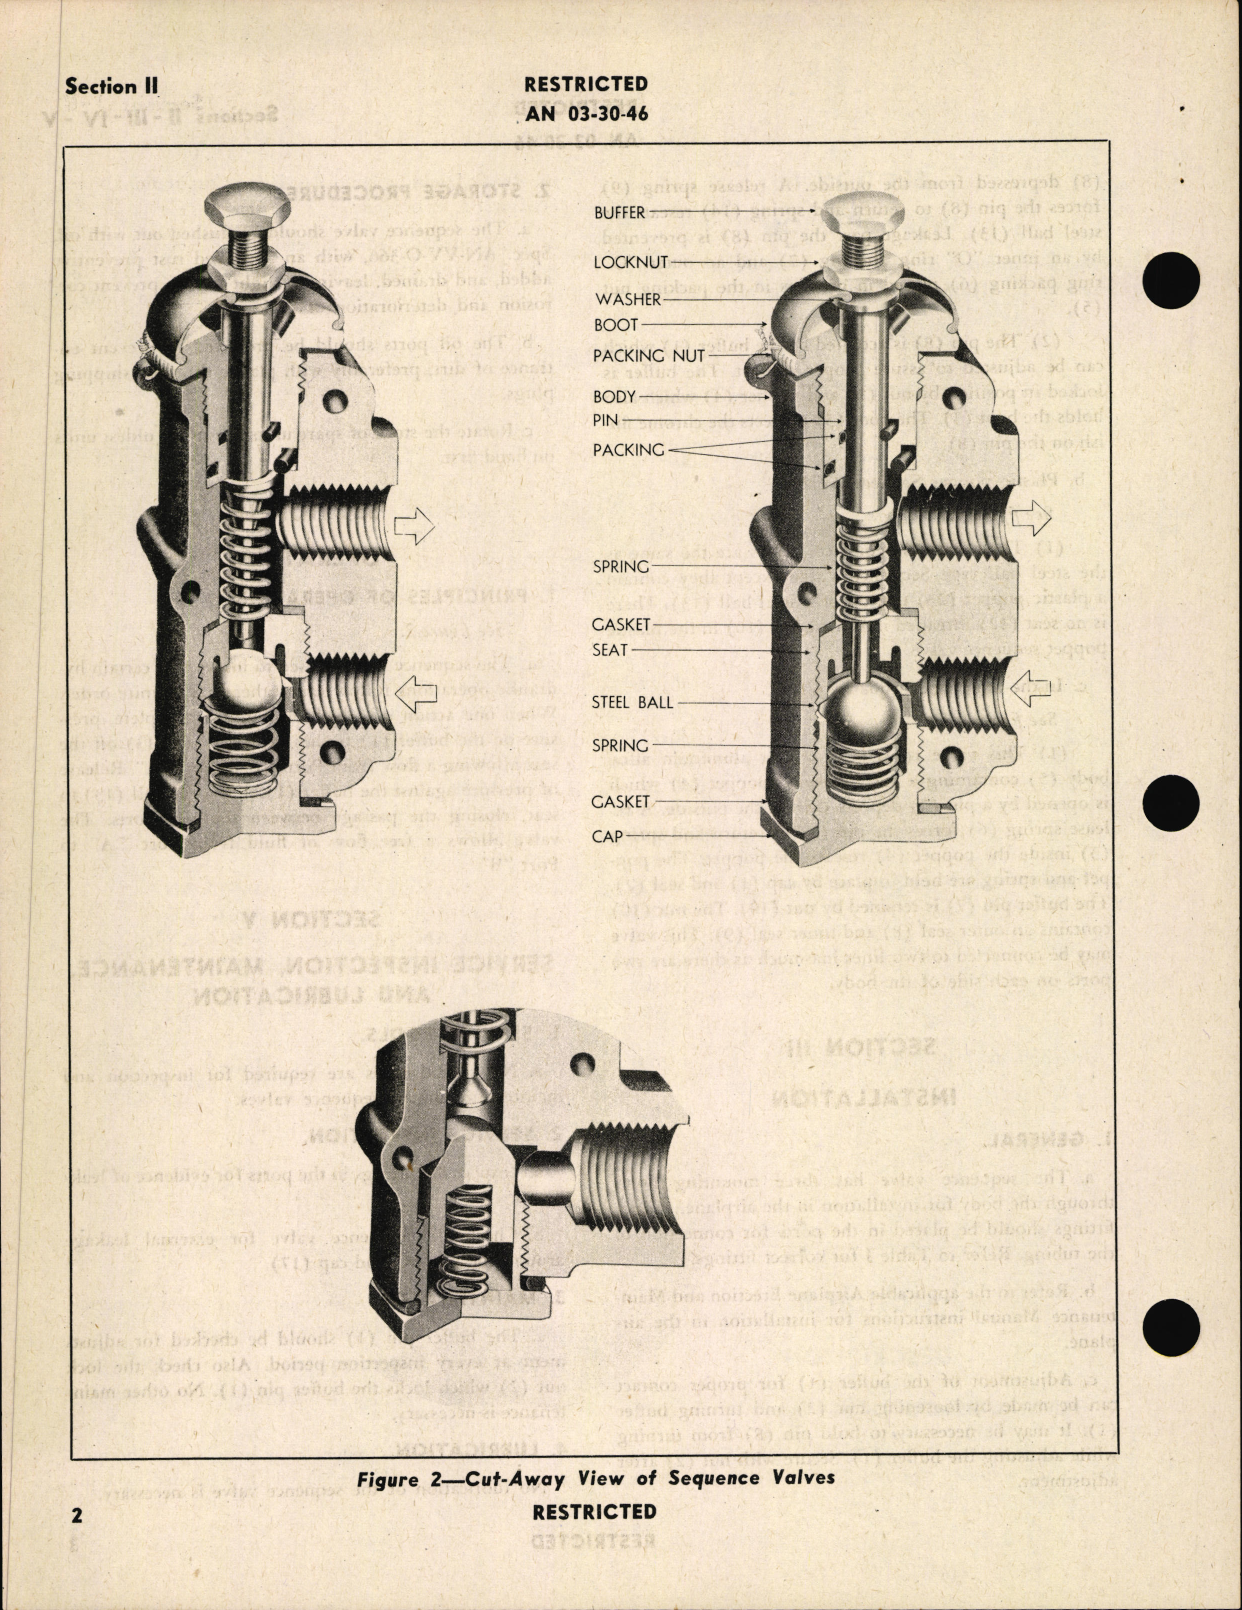 Sample page 6 from AirCorps Library document: Handbook of Instructions with Parts Catalog for Hydraulic Sequence Valves